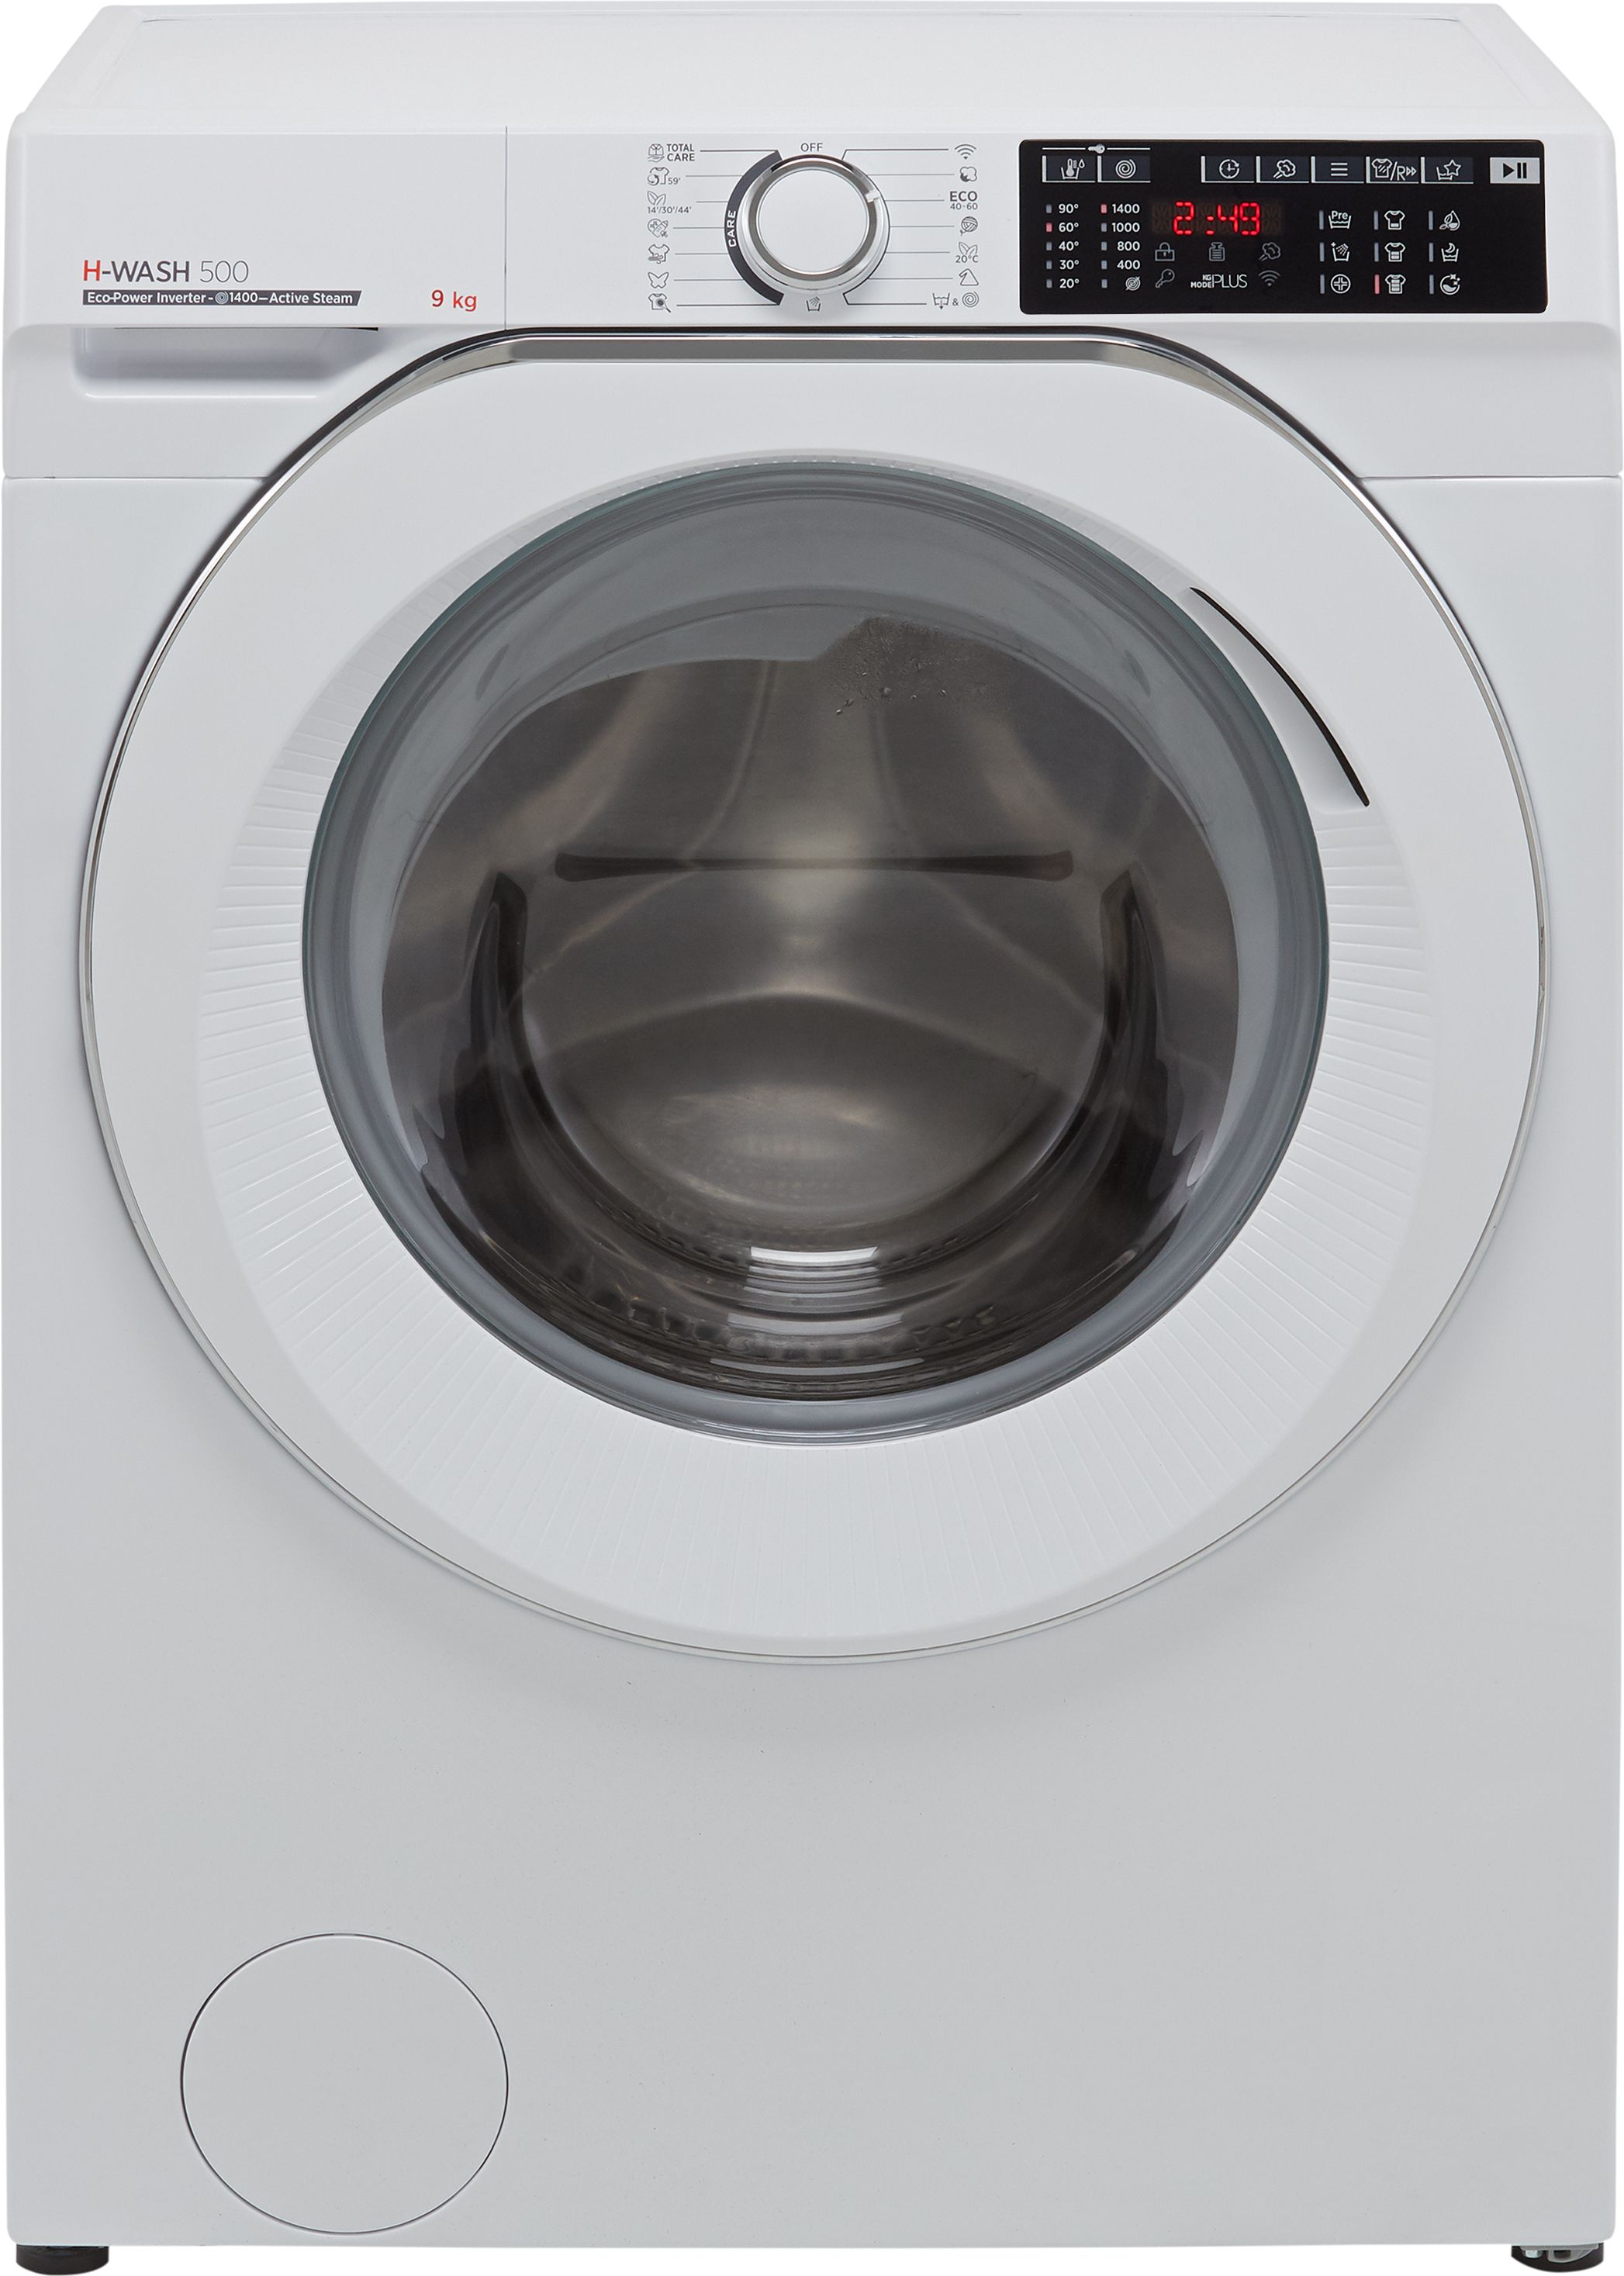 Hoover H-WASH 500 HW49AMC/1 9kg Washing Machine with 1400 rpm - White - A Rated, White